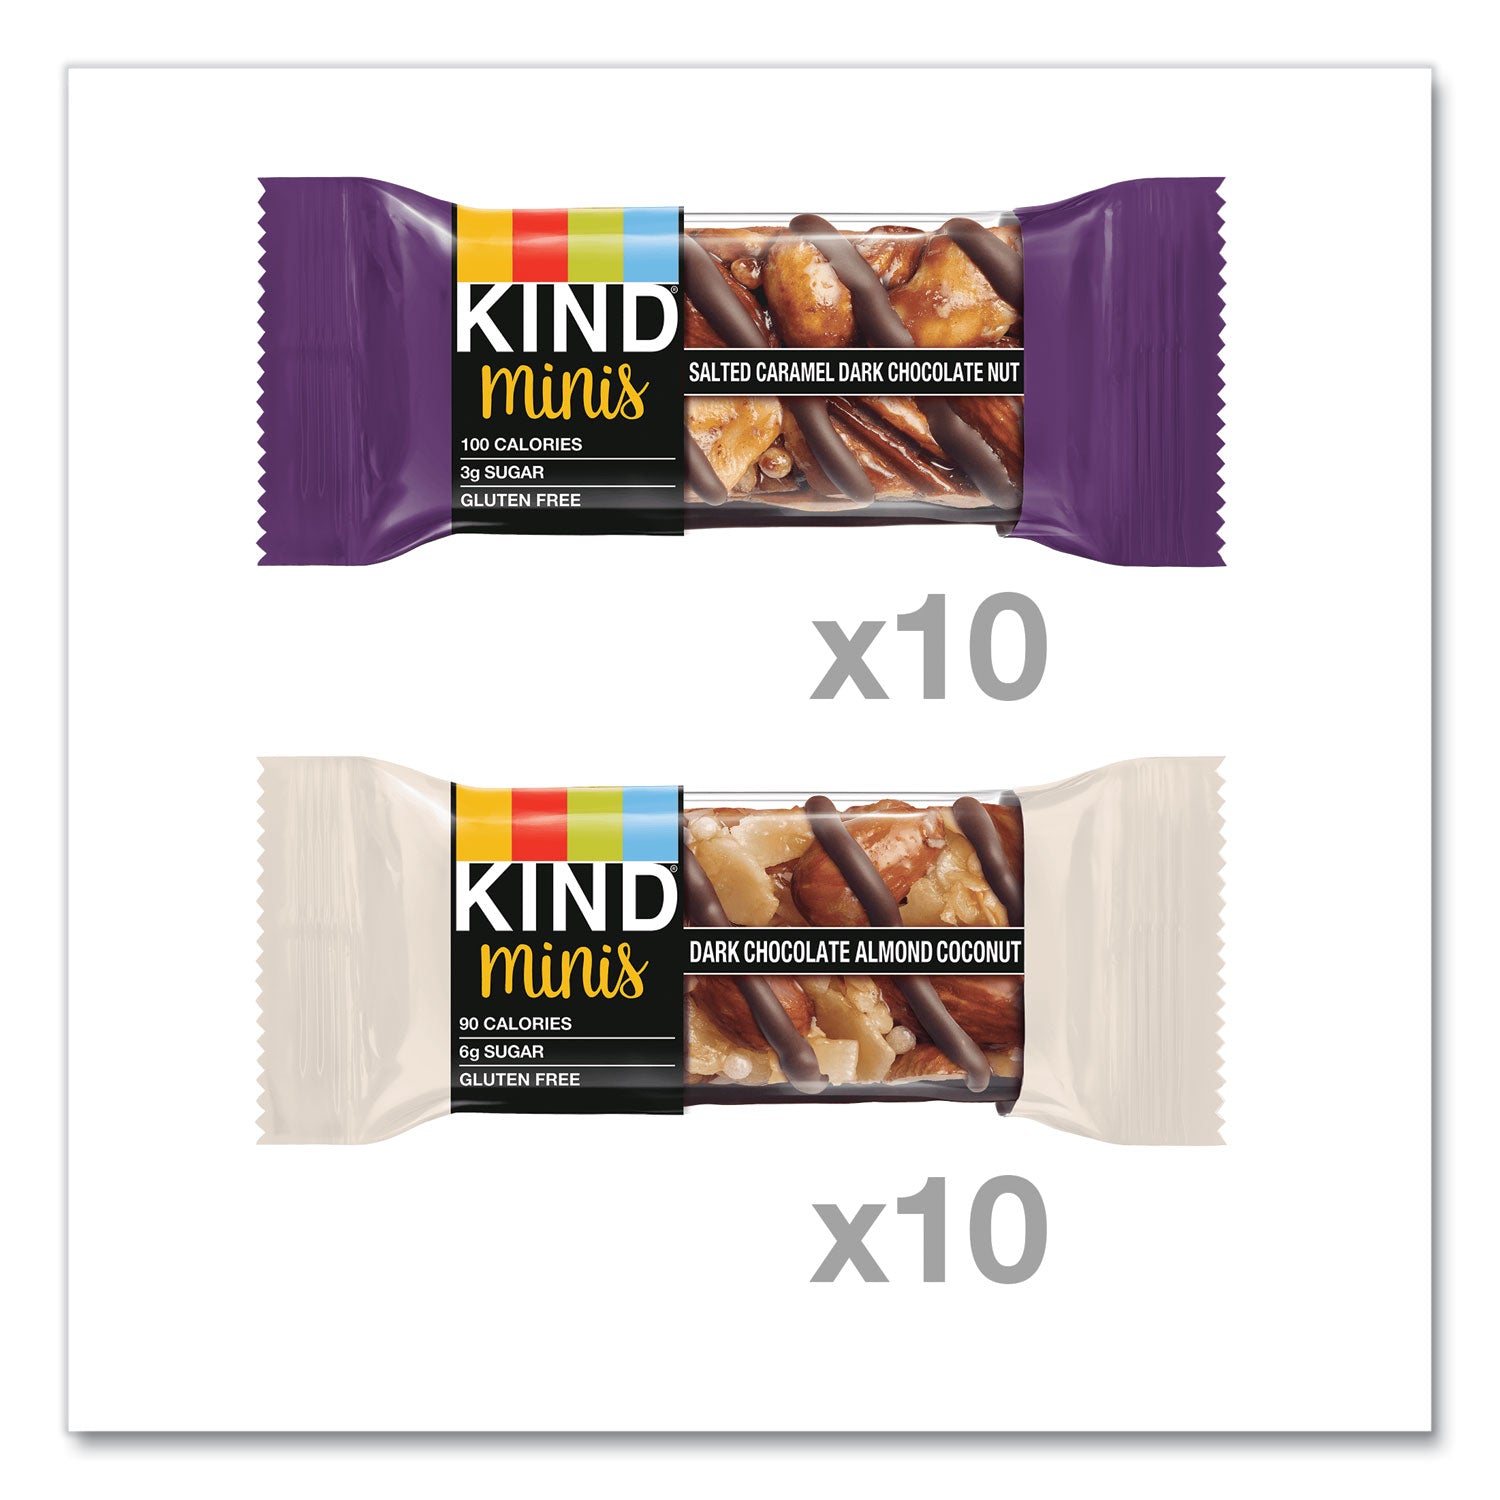 minis-salted-caramel-and-dark-chocolate-nut-dark-chocolate-almond-and-coconut-07-oz-20-pack_knd27970 - 2